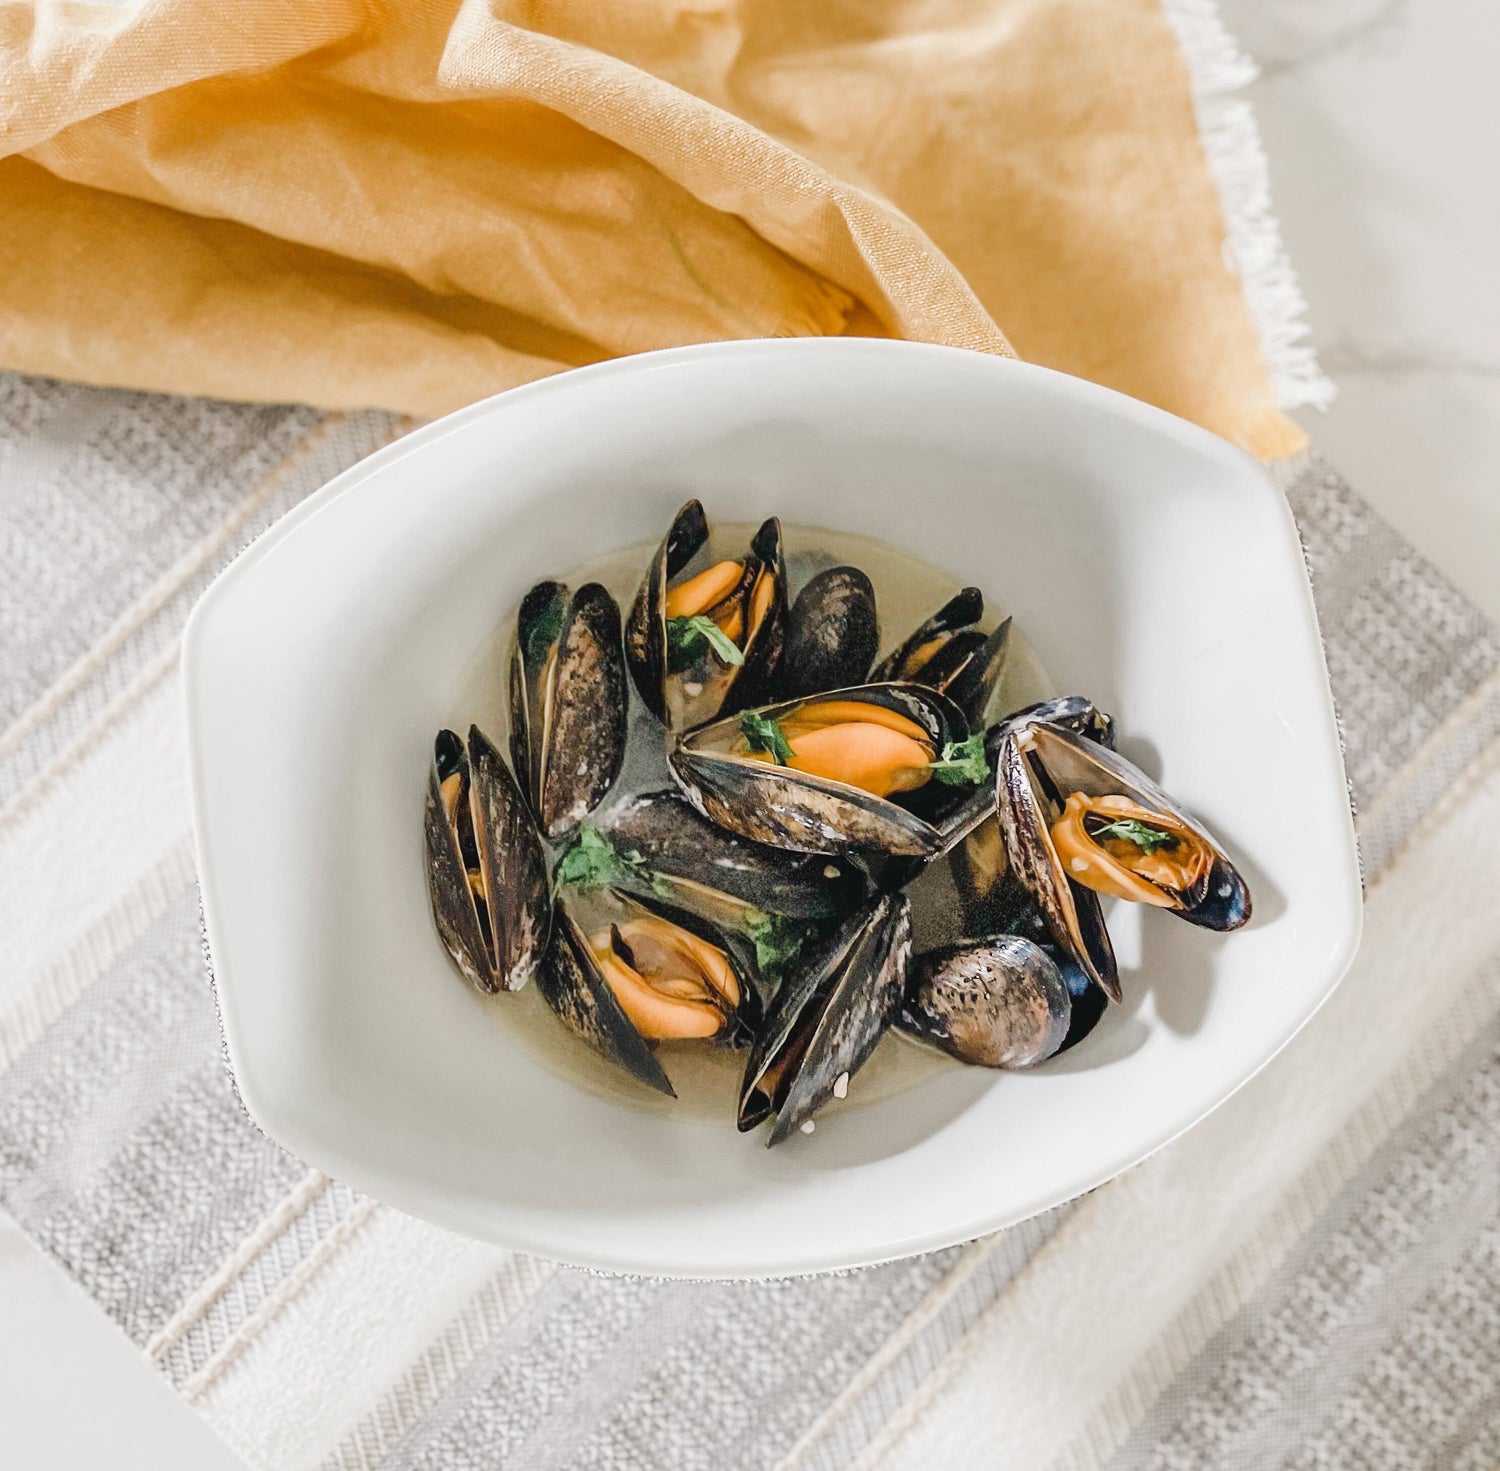 Portuguese-Style Mussels - May 13 - Our Lady of Fatima